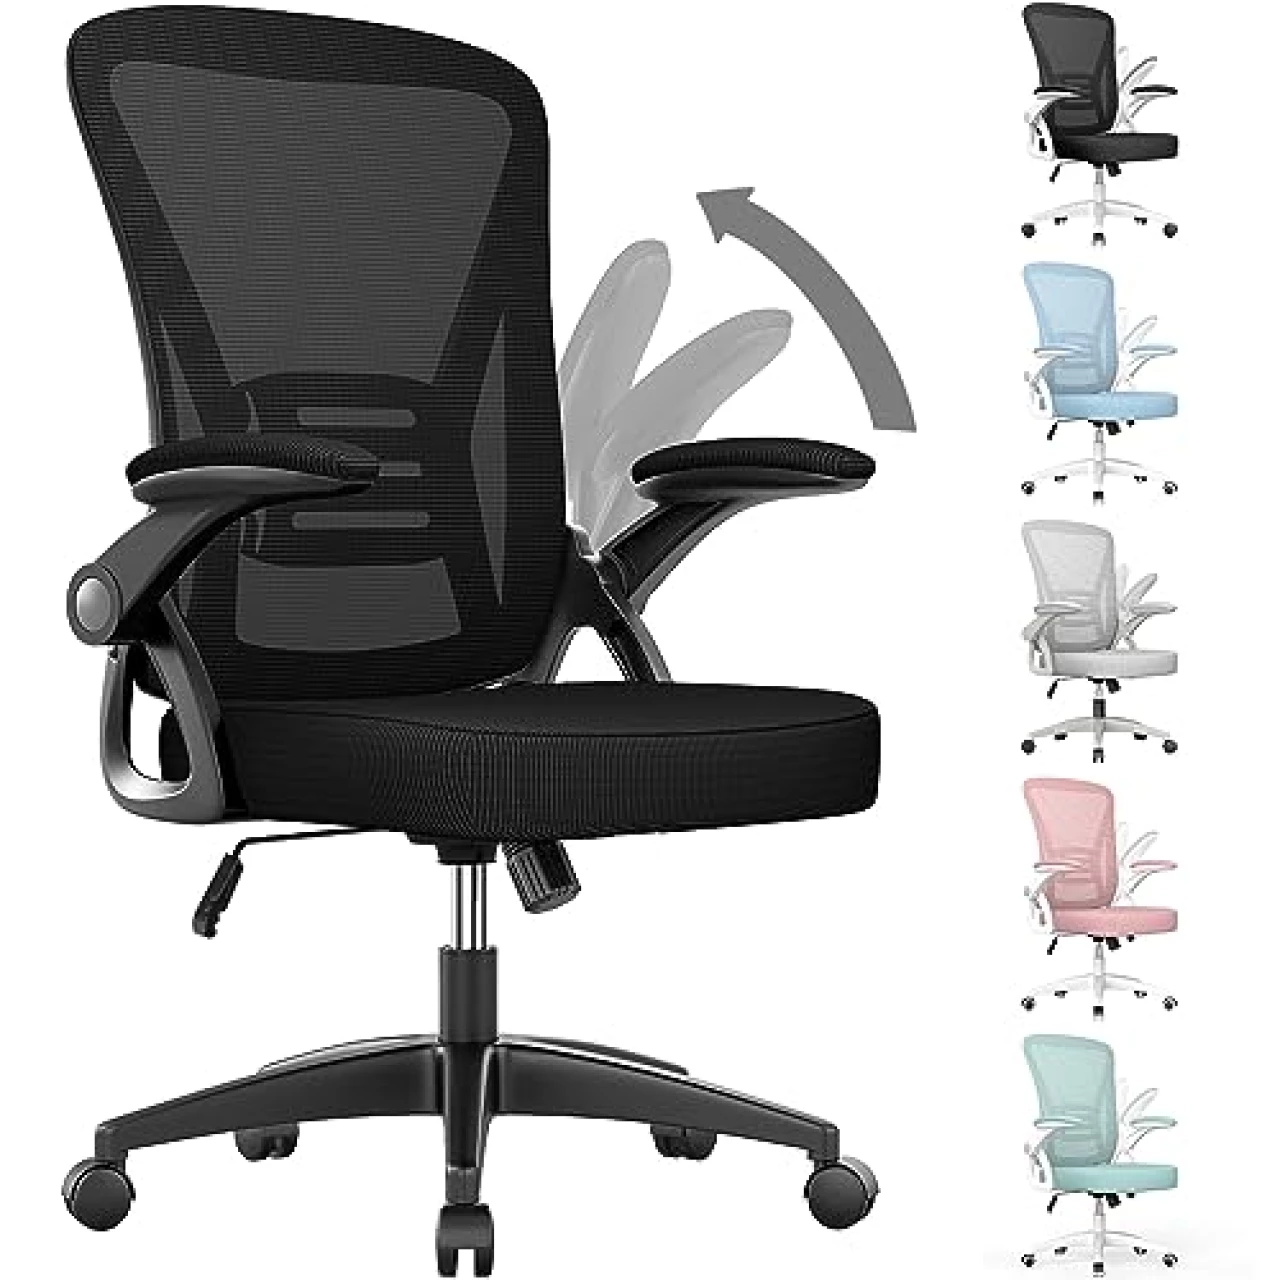 naspaluro Ergonomic Office Chair, Mid-Back Computer Chair with Adjustable Height, Flip-Up Arms and Lumbar Support, Breathable Mesh Desk Chair for Home Study Working